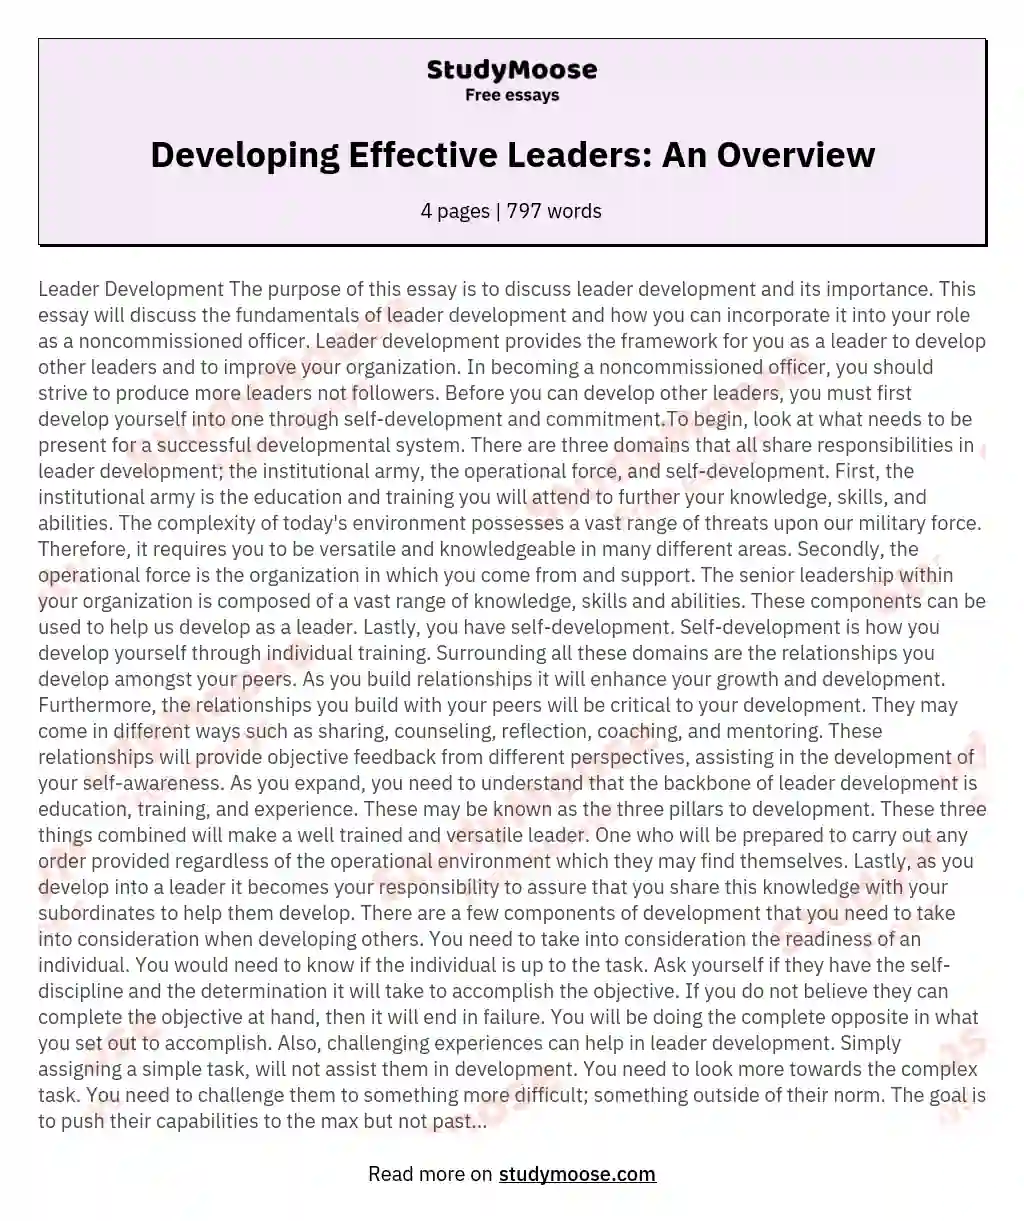 Leader Development The purpose of this essay is to discuss leader development and